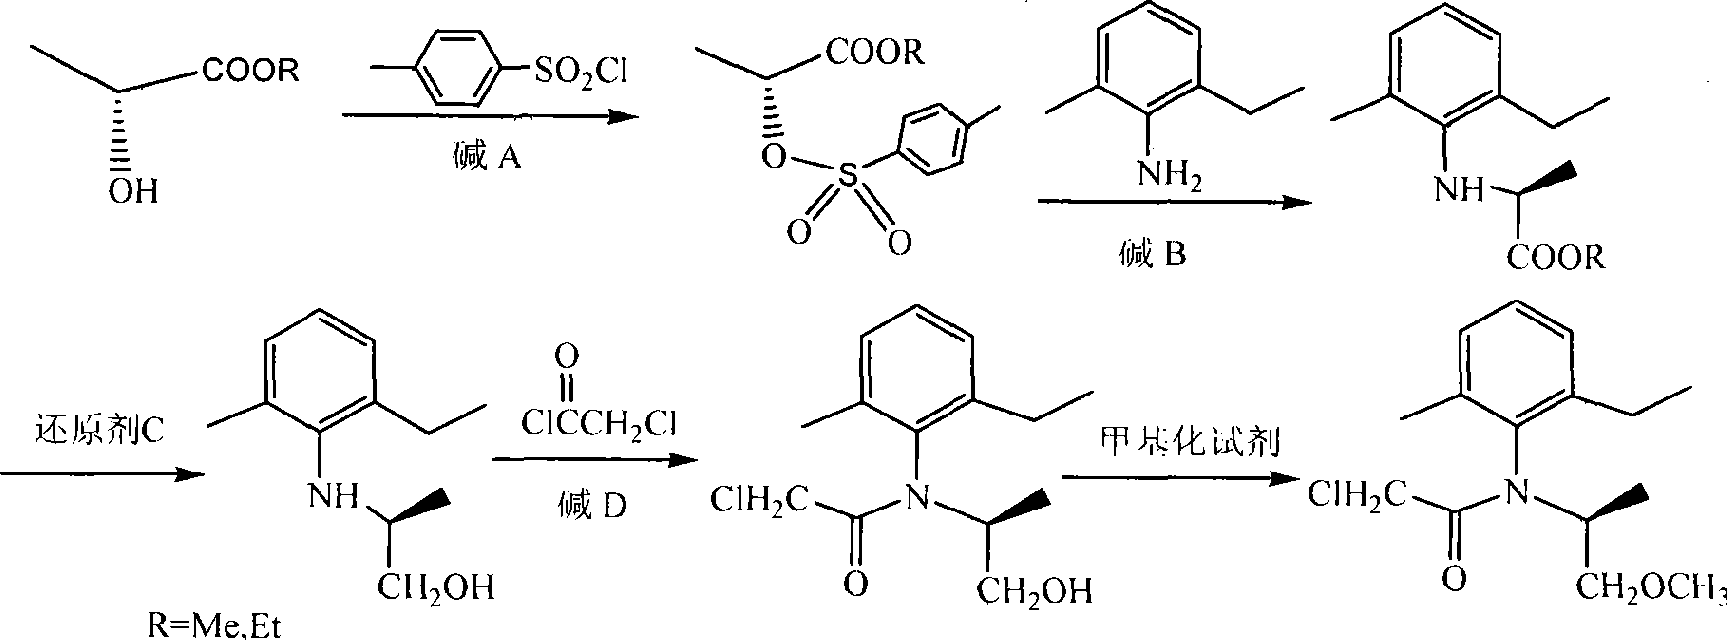 Novel method for synthesis of (S)-propisochlor